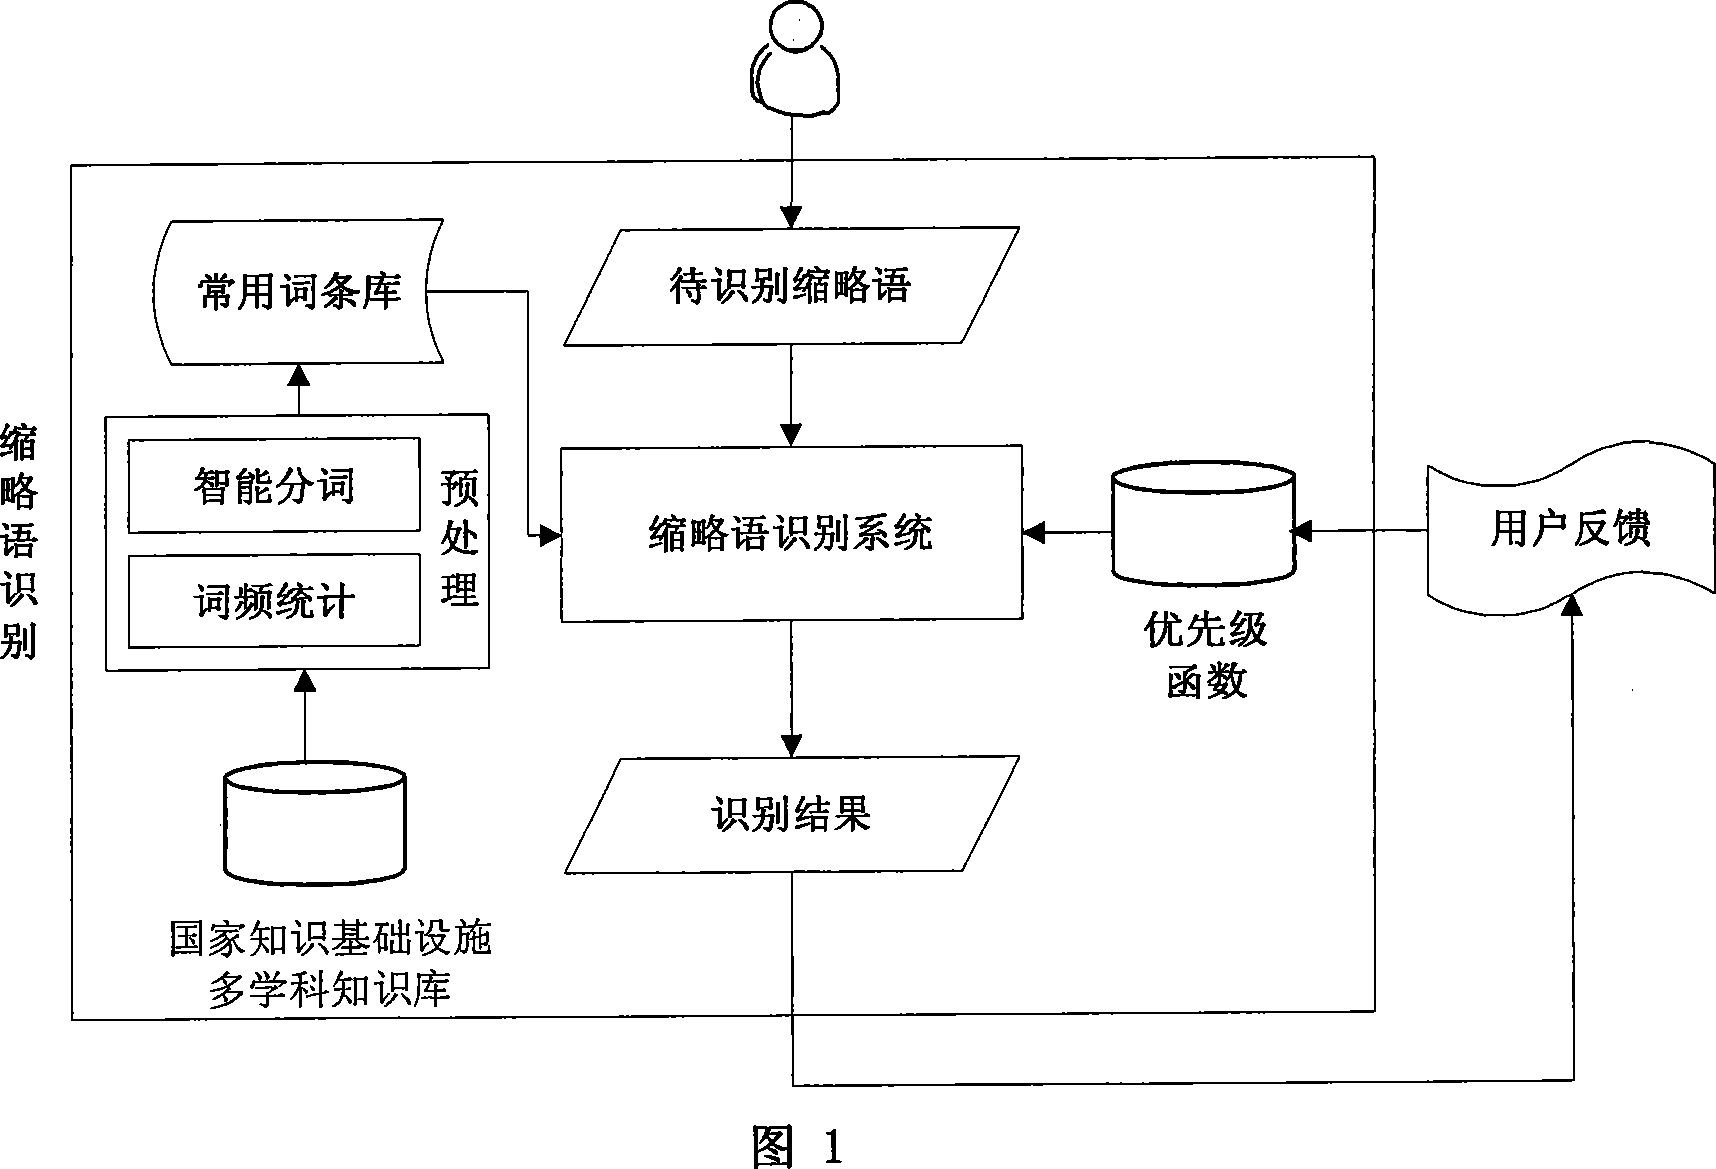 Method and system for identifying Chinese full name based on Chinese shortened form of entity